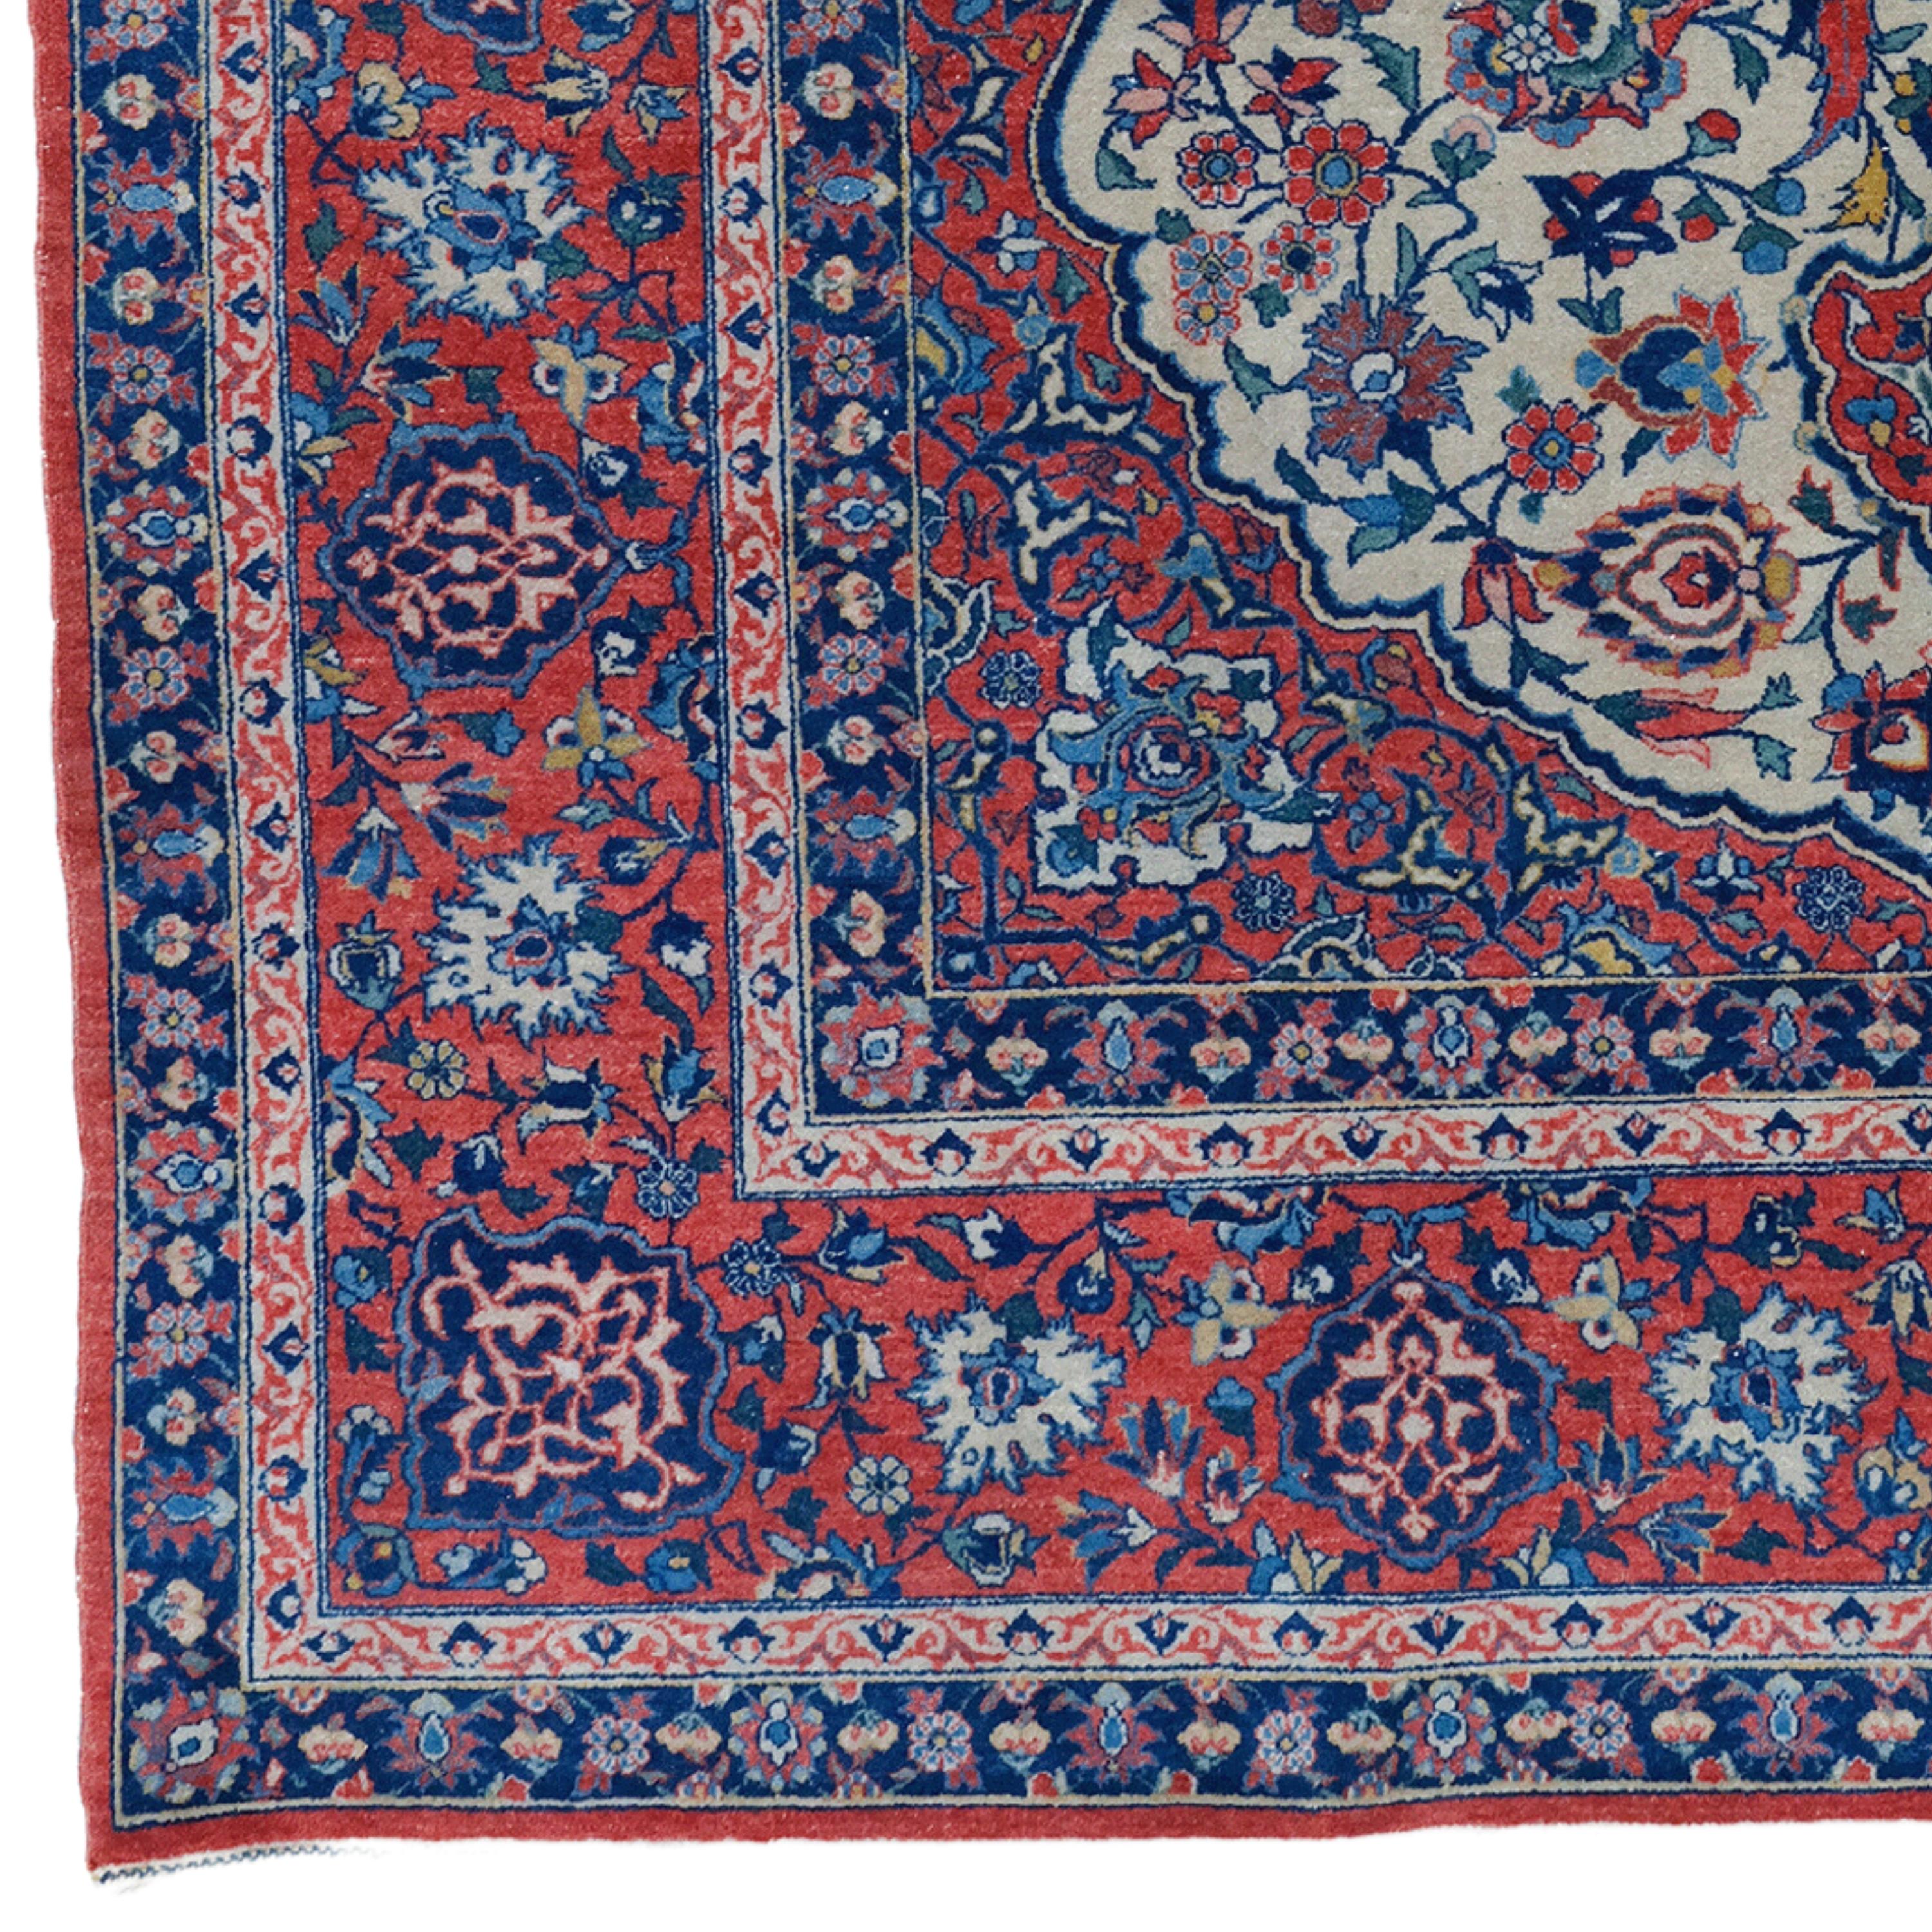 Symbol of Nobility: 19th Century Antique Isfahan Carpet

If you want to add a historical touch to your home, this antique rug is for you. This carpet has a rich history and intricate craftsmanship, dating back to the late 19th century. Isfahan is